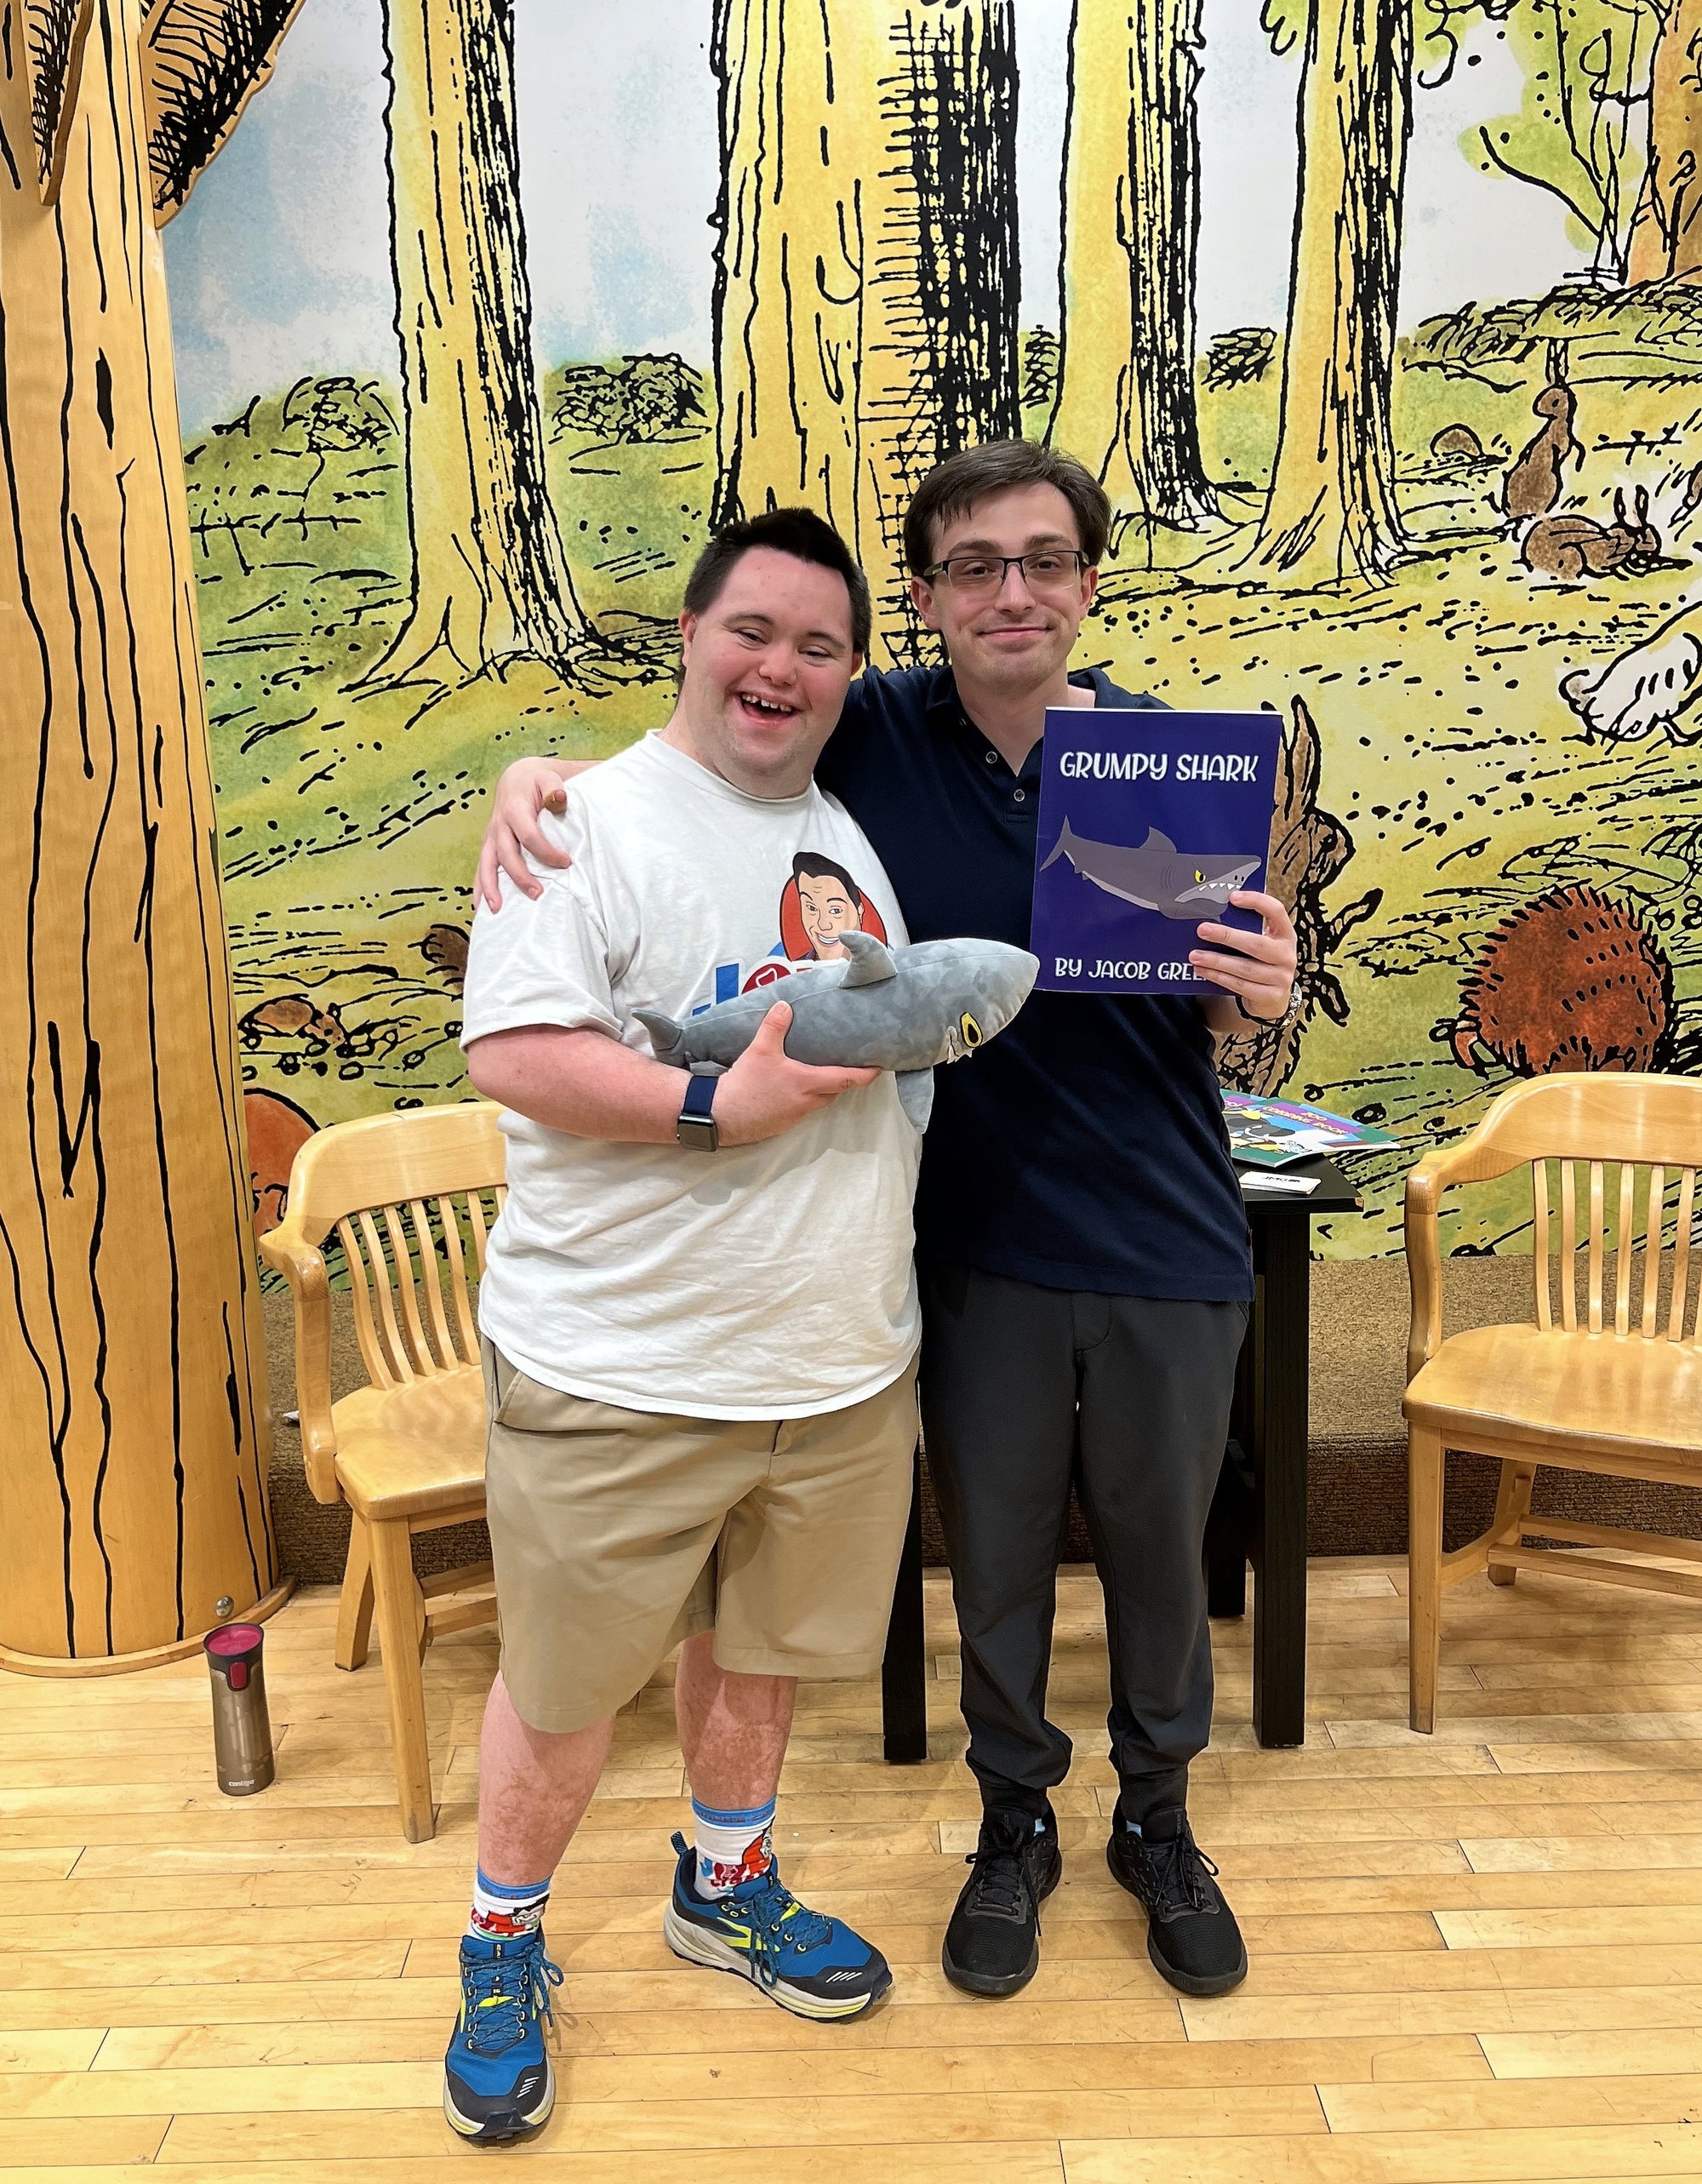 John Cheers on Jacob Greene, an Artist with Autism, at His Book Reading Event